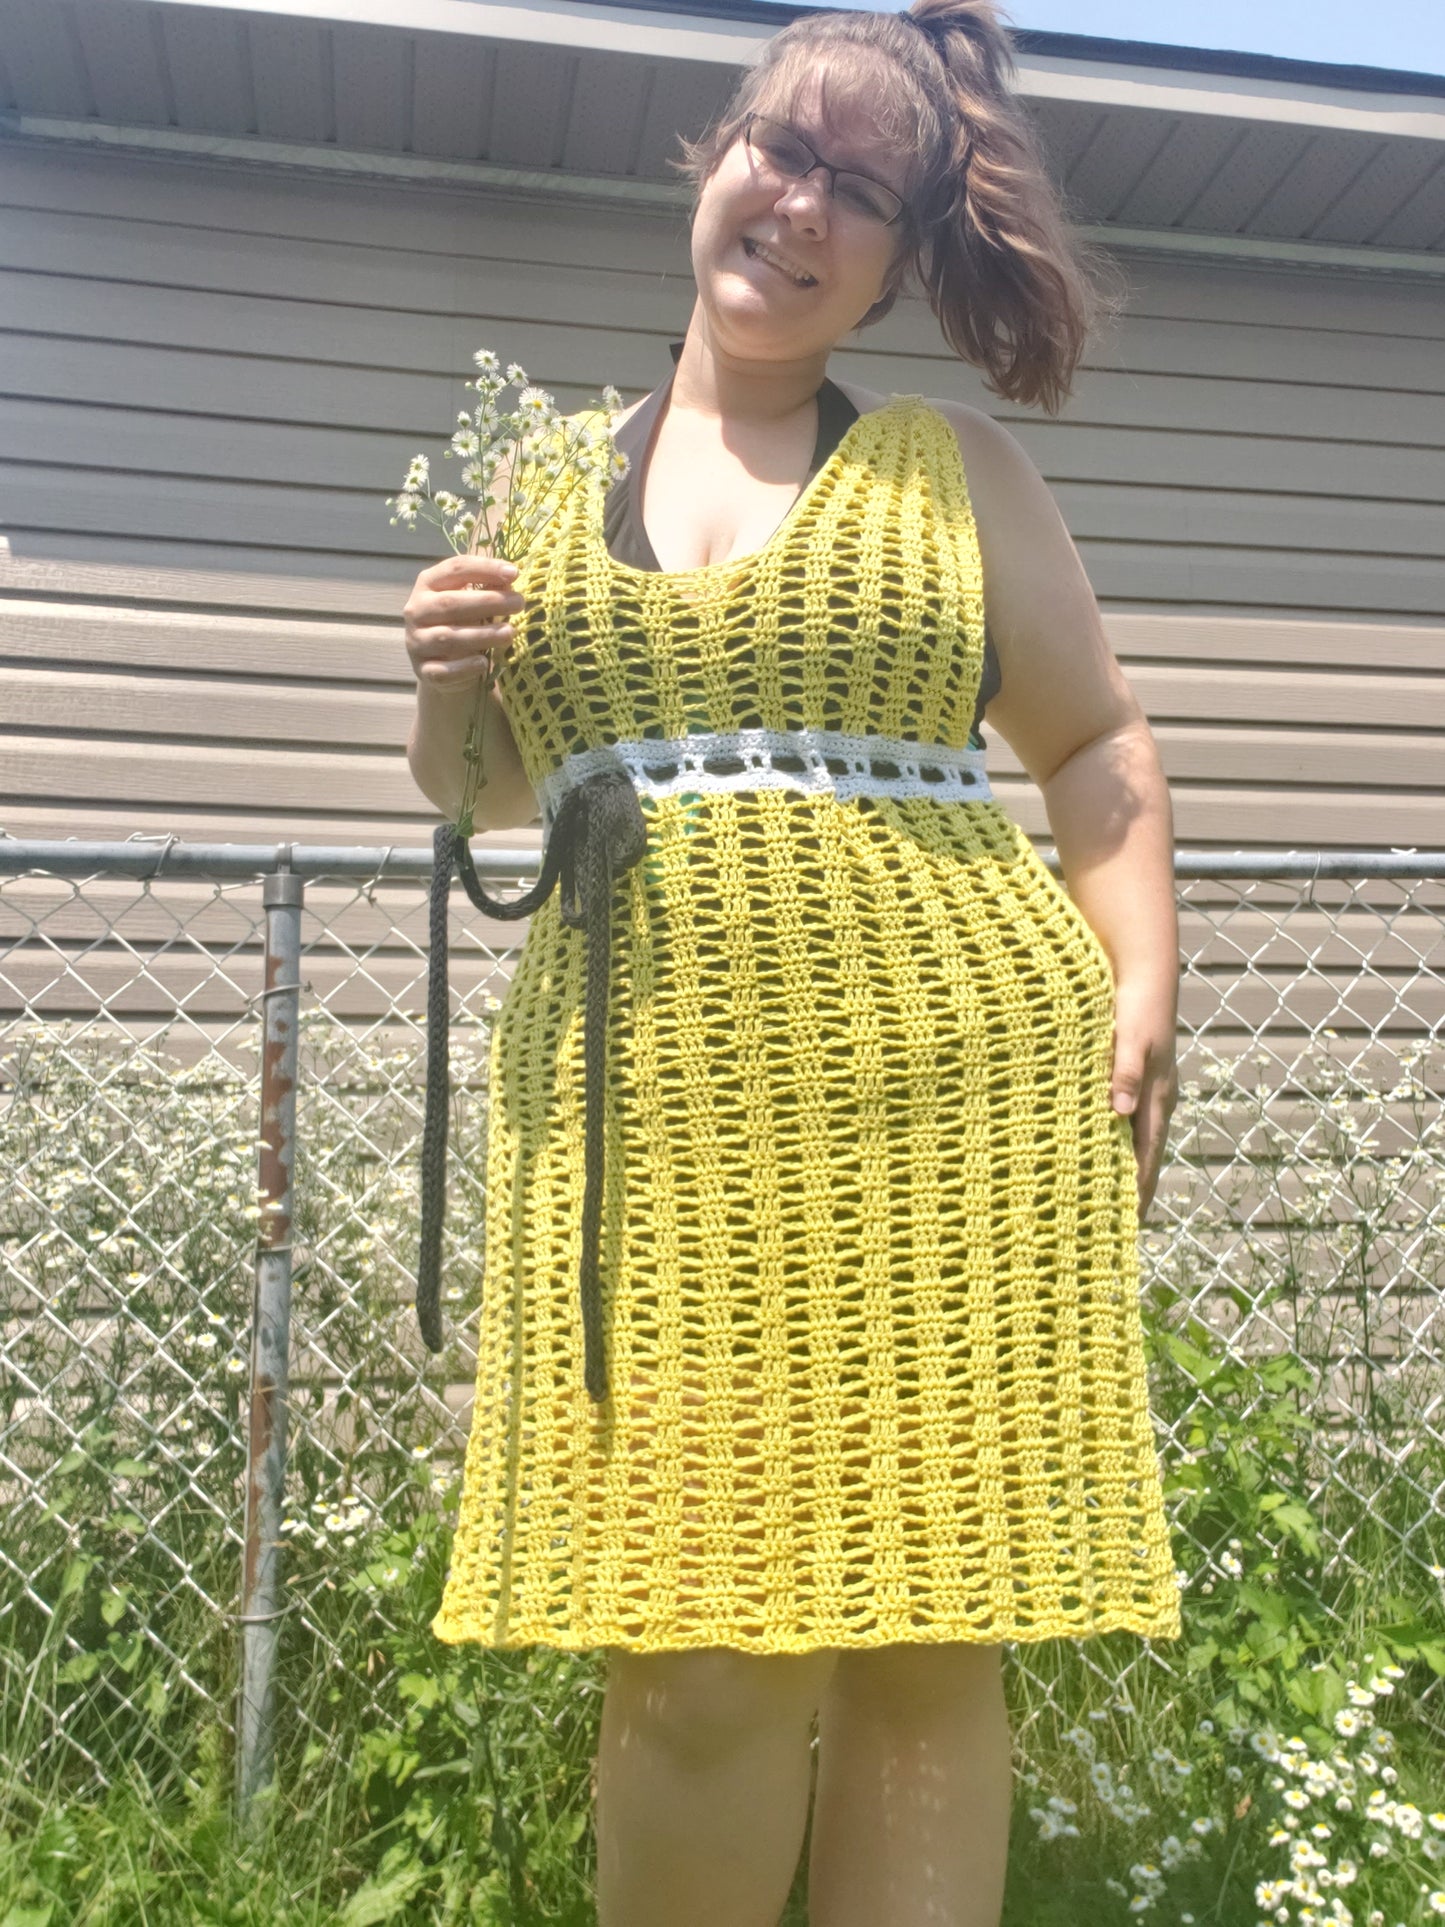 Ladder Lace Cover-up Pattern (Crochet)